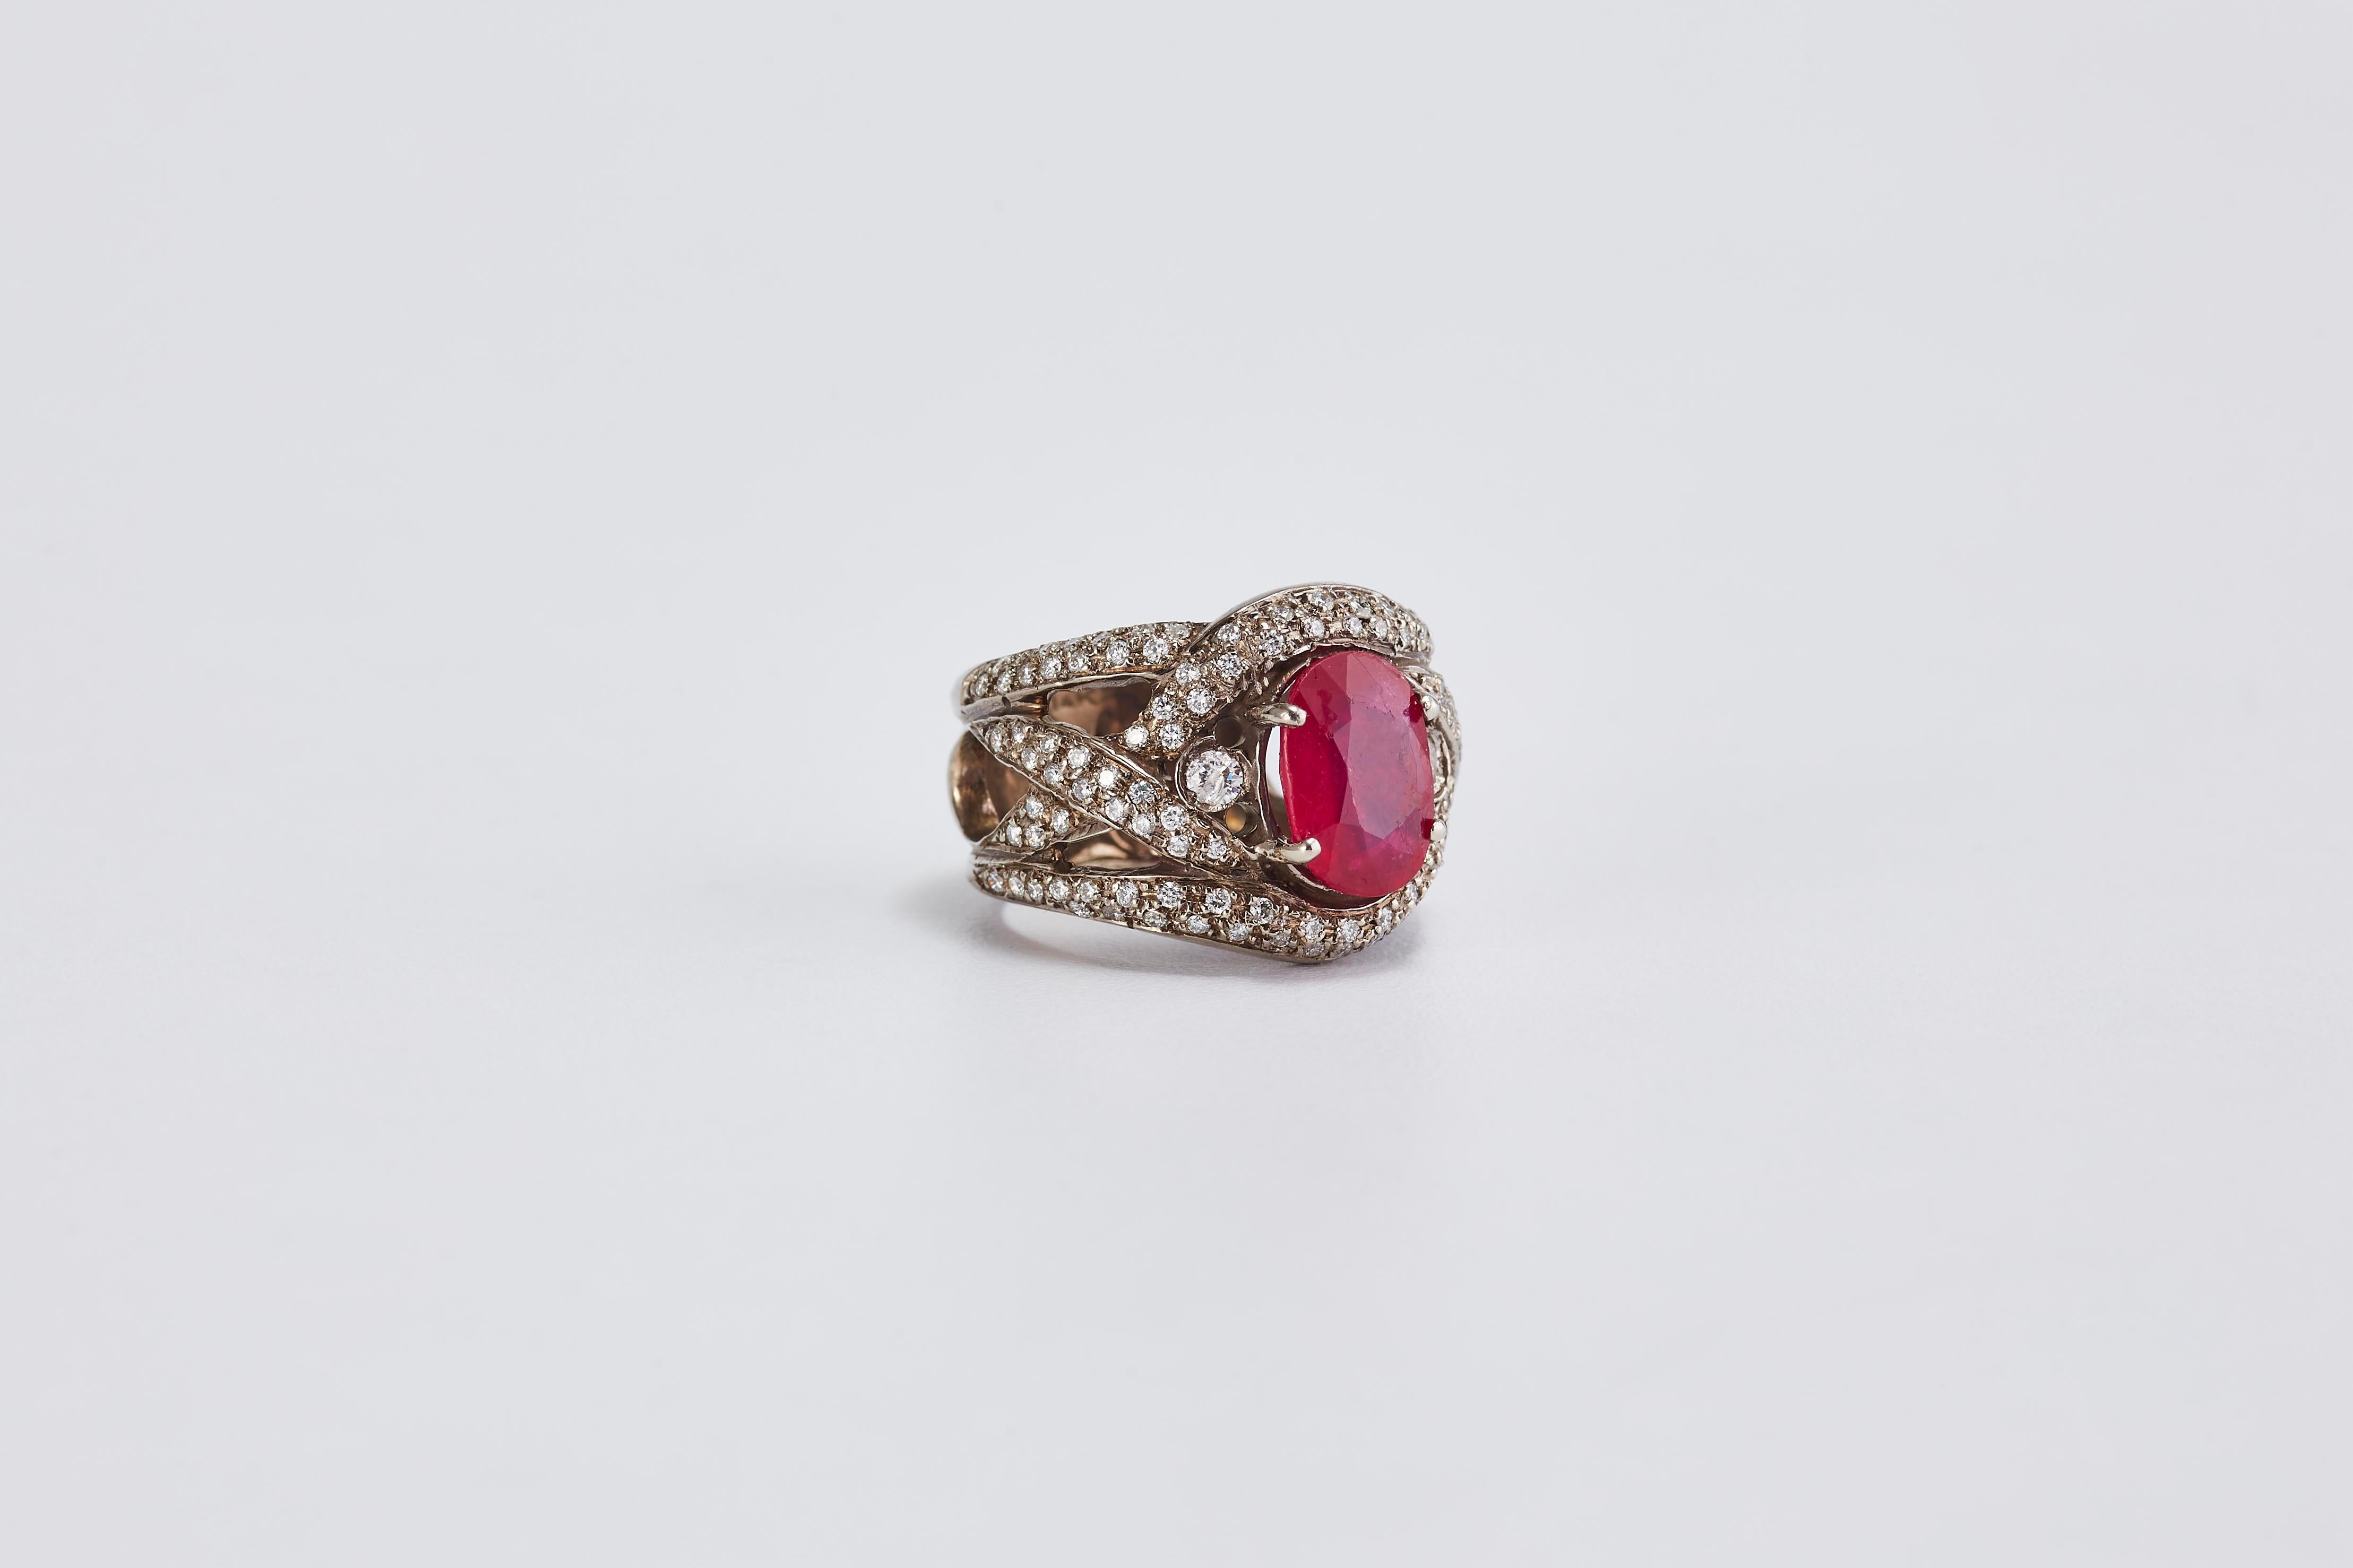 14 Karat White Gold Ring with Center Stone Ruby and Diamonds
Lovely gold ring with center oval cut Ruby and band filled with diamonds.
Ruby is 2.5 ct.
Quality diamonds G VS2 total of 2.30 ct. 
Total weight: 10.05 grams. Size: 6 US